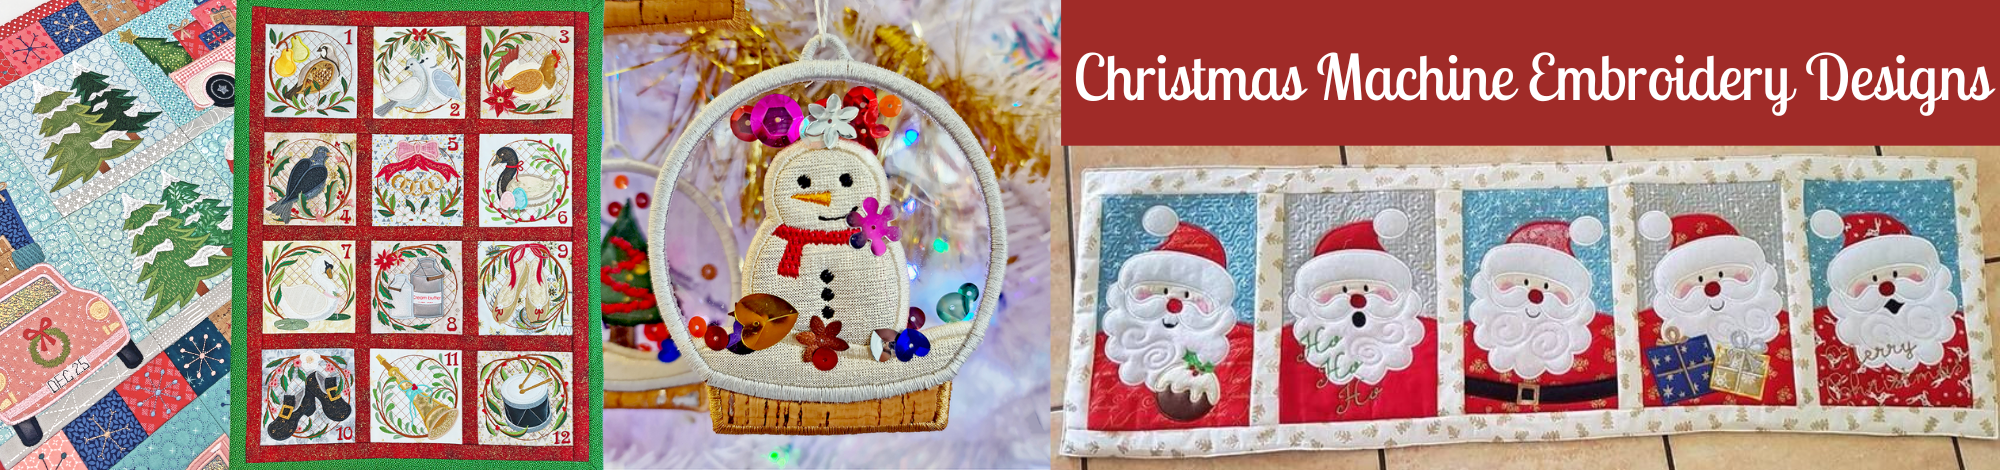 Christmas Machine Embroidery Designs, in the hoop Christmas designs. Christmas embroidery designs